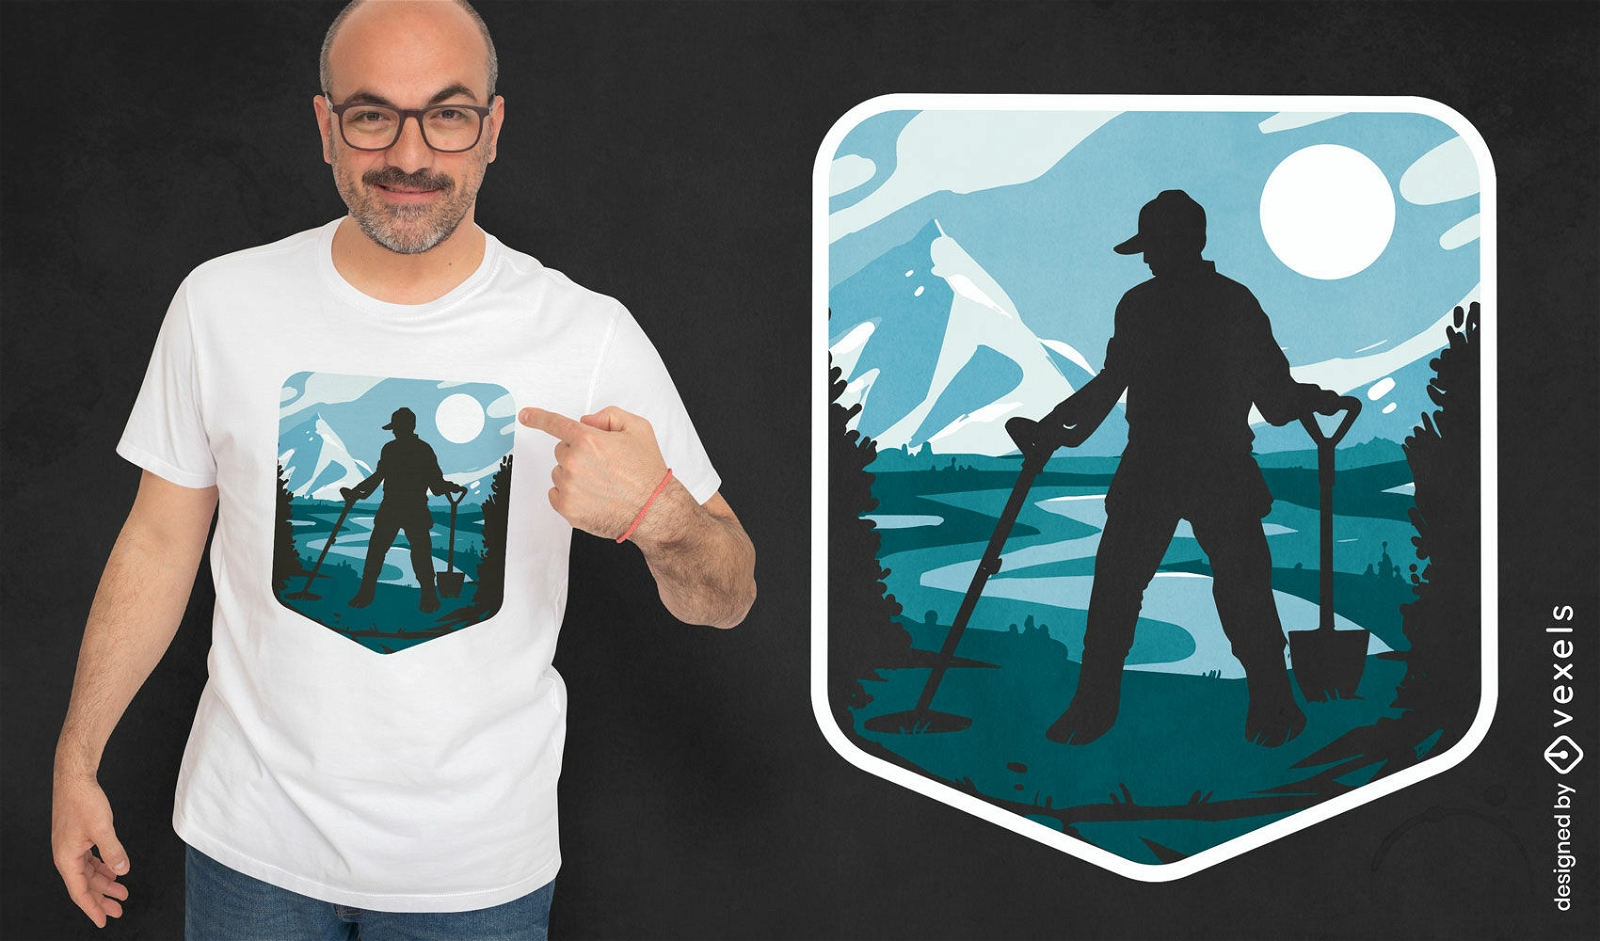 Man with metal detector silhouette t-shirt design